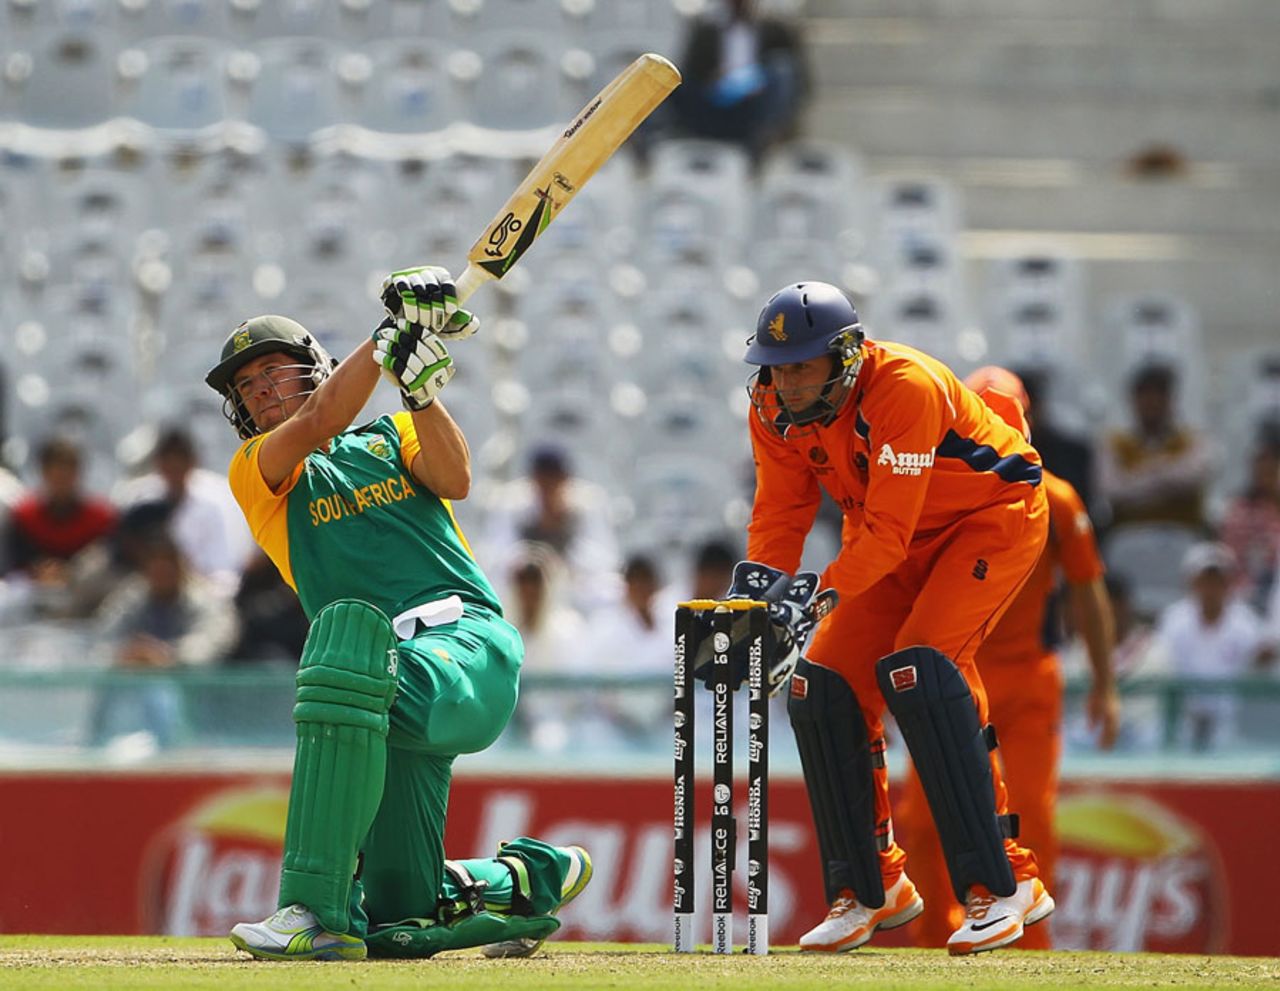 AB de Villiers lifts the ball for a six during his century off 88 balls, Netherlands v South Africa, World Cup 2011, Mohali, March 3, 2011